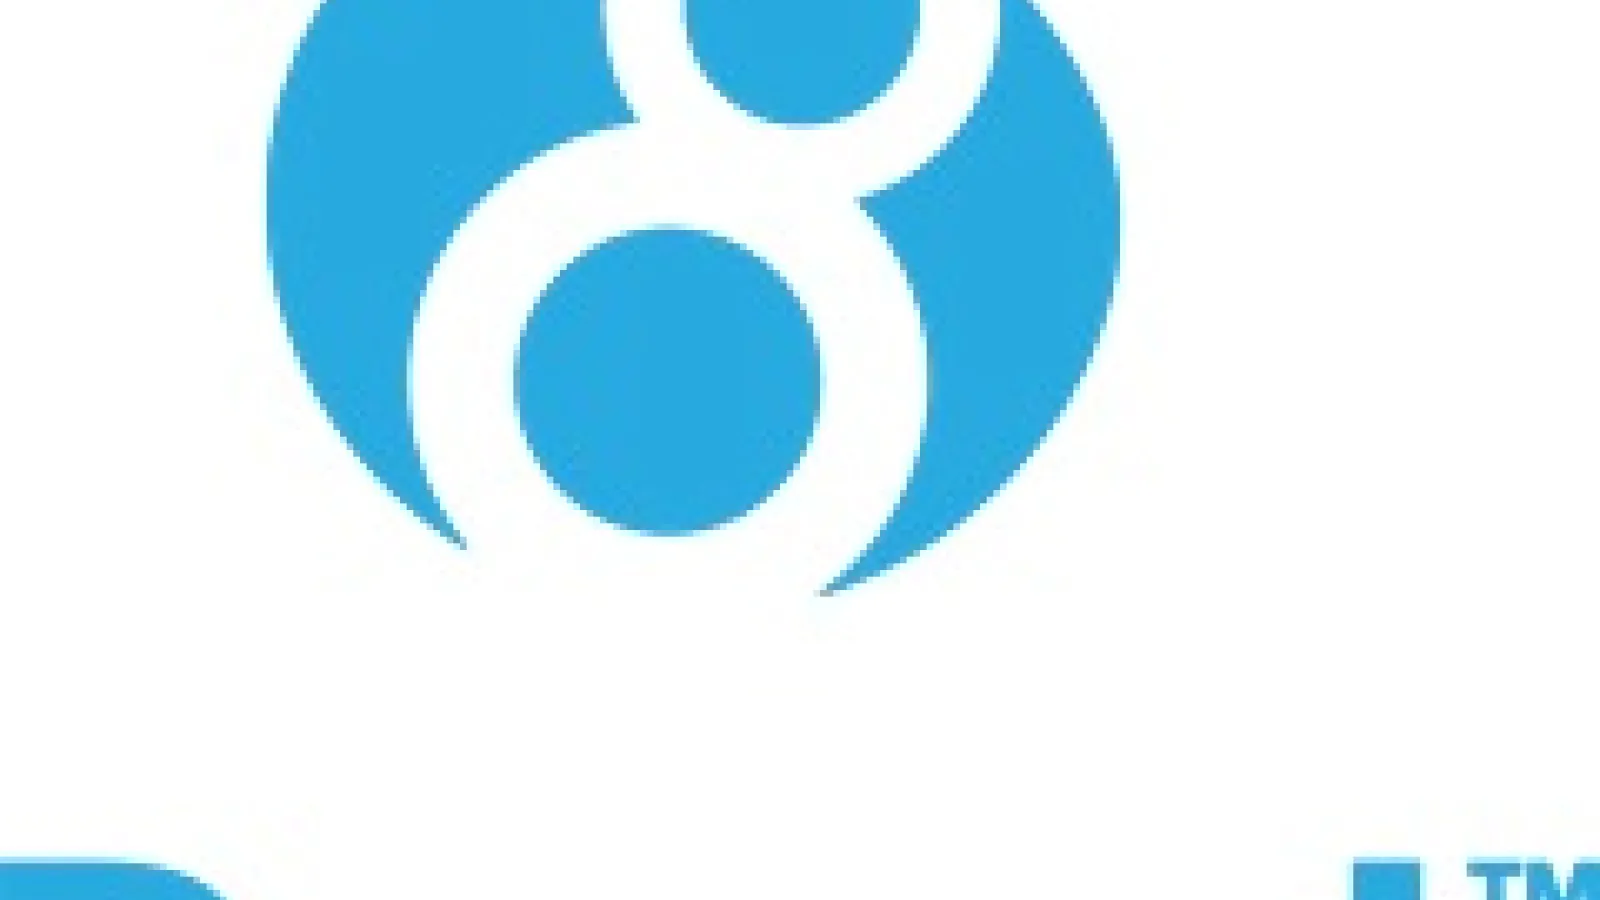 Drupal 8- What’s new and Expected Inside